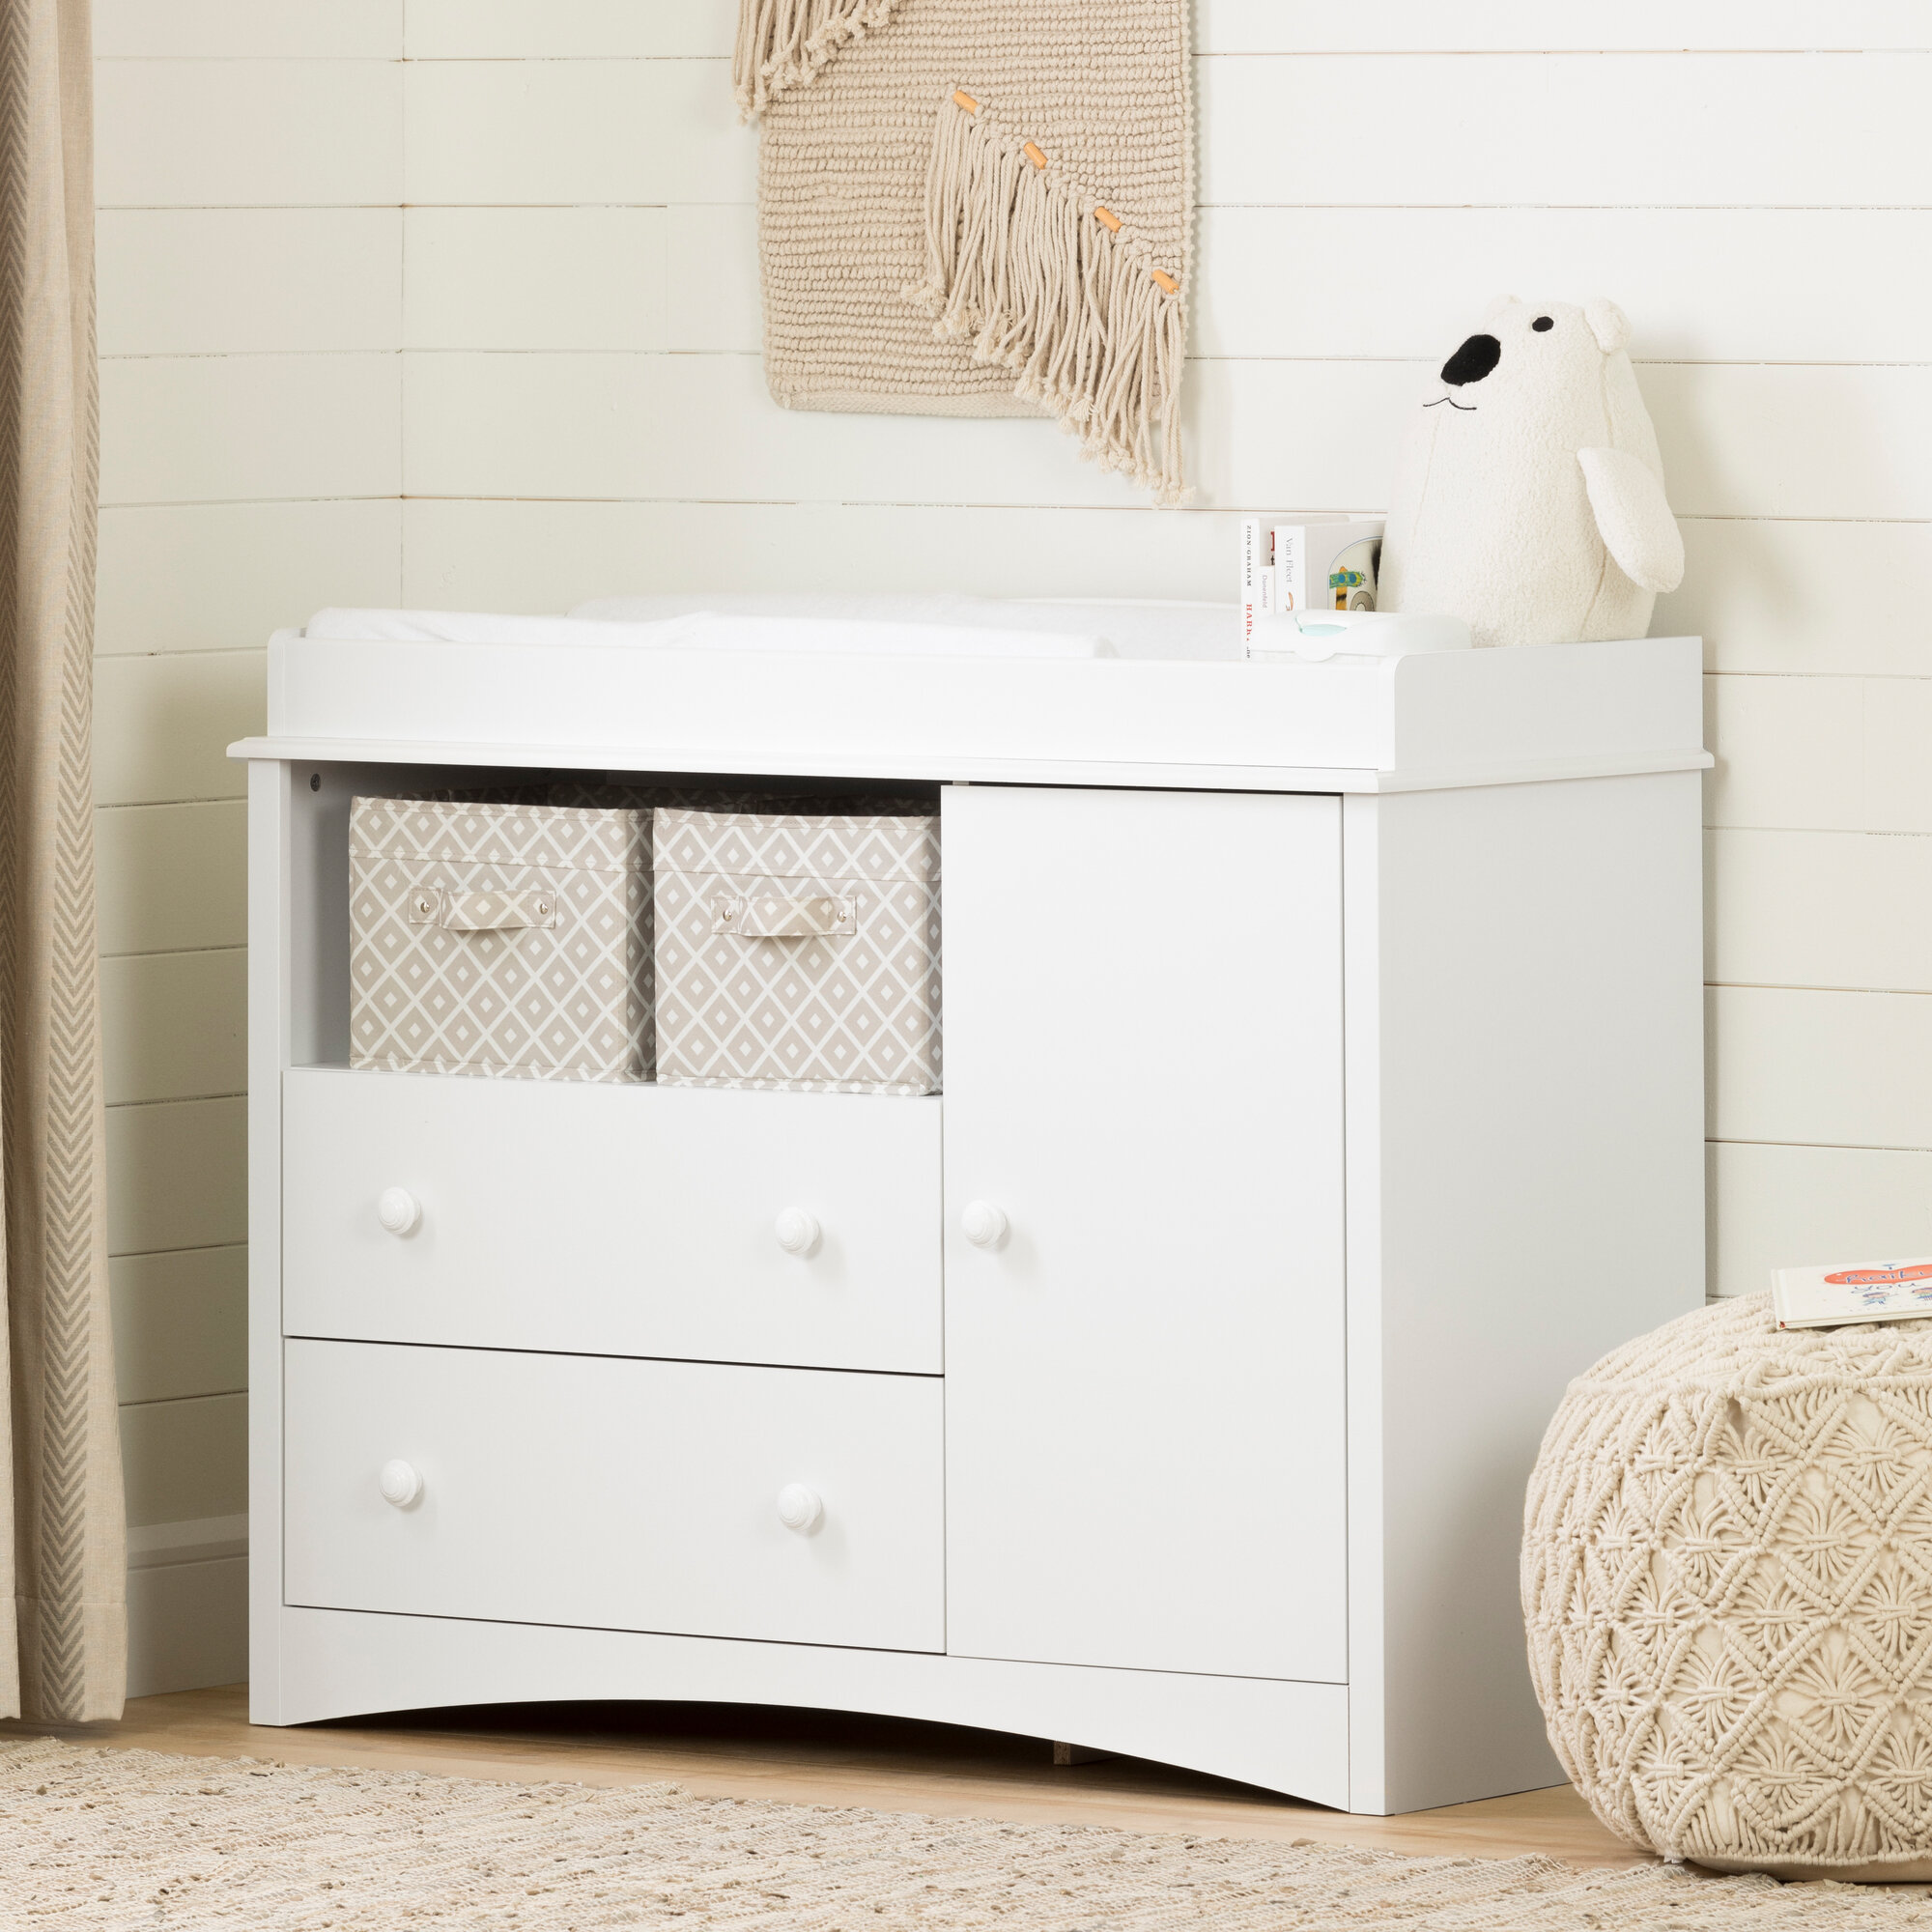 changing table with cubbies